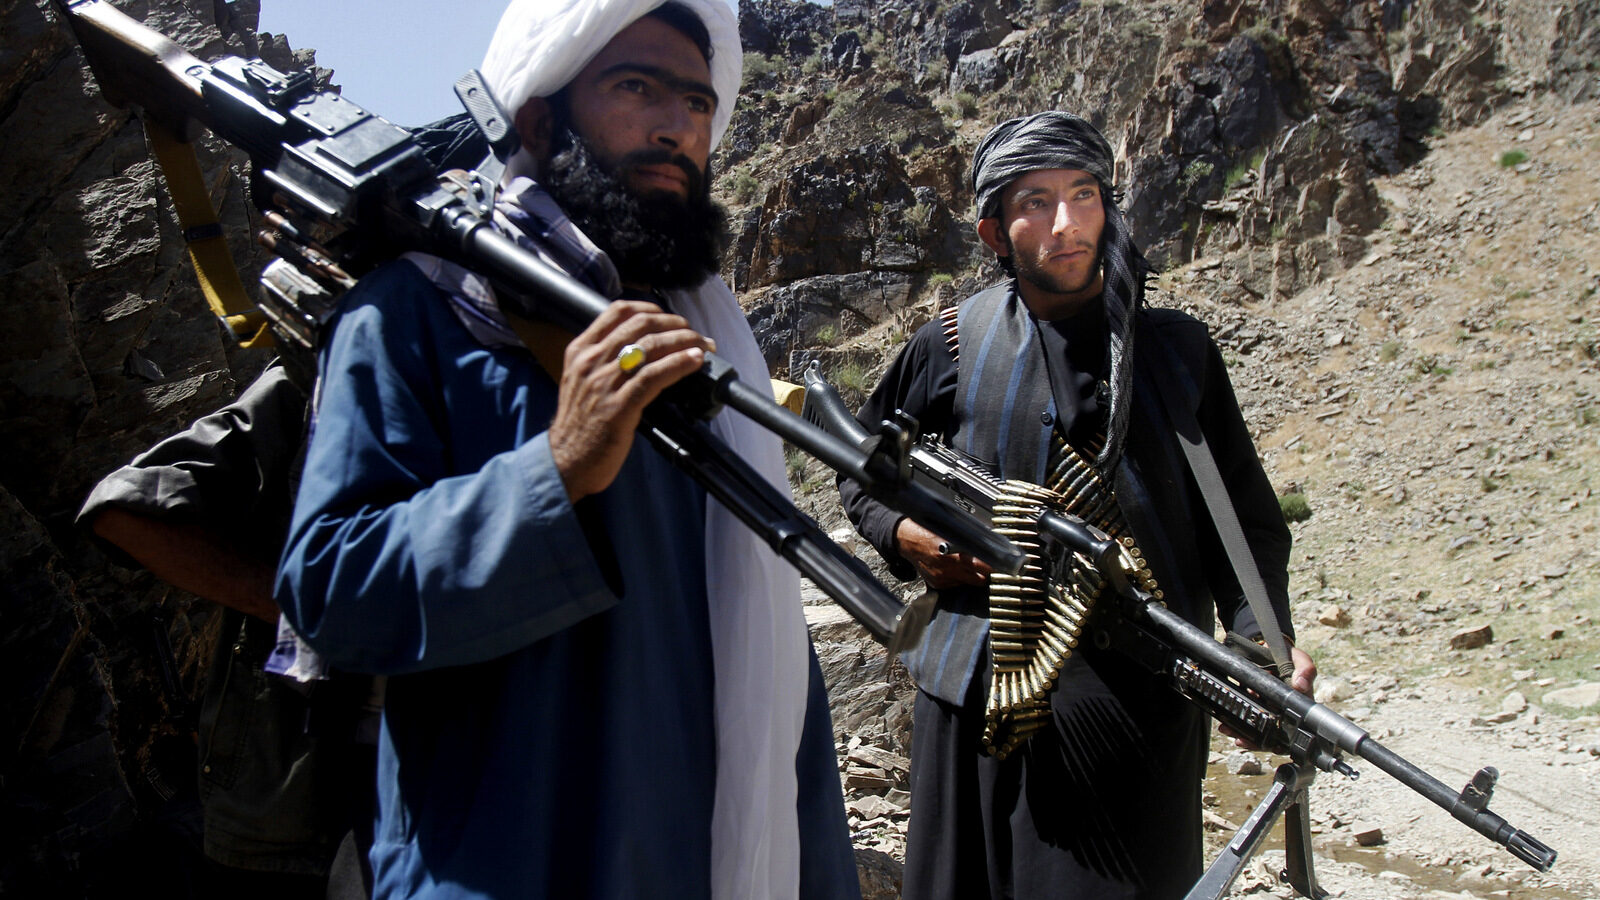 In this Friday, May 27, 2016 photo, members of a breakaway faction of the Taliban fighters prepare to guard a gathering , in Shindand district of Herat province, Afghanistan. (AP/Allauddin Khan)